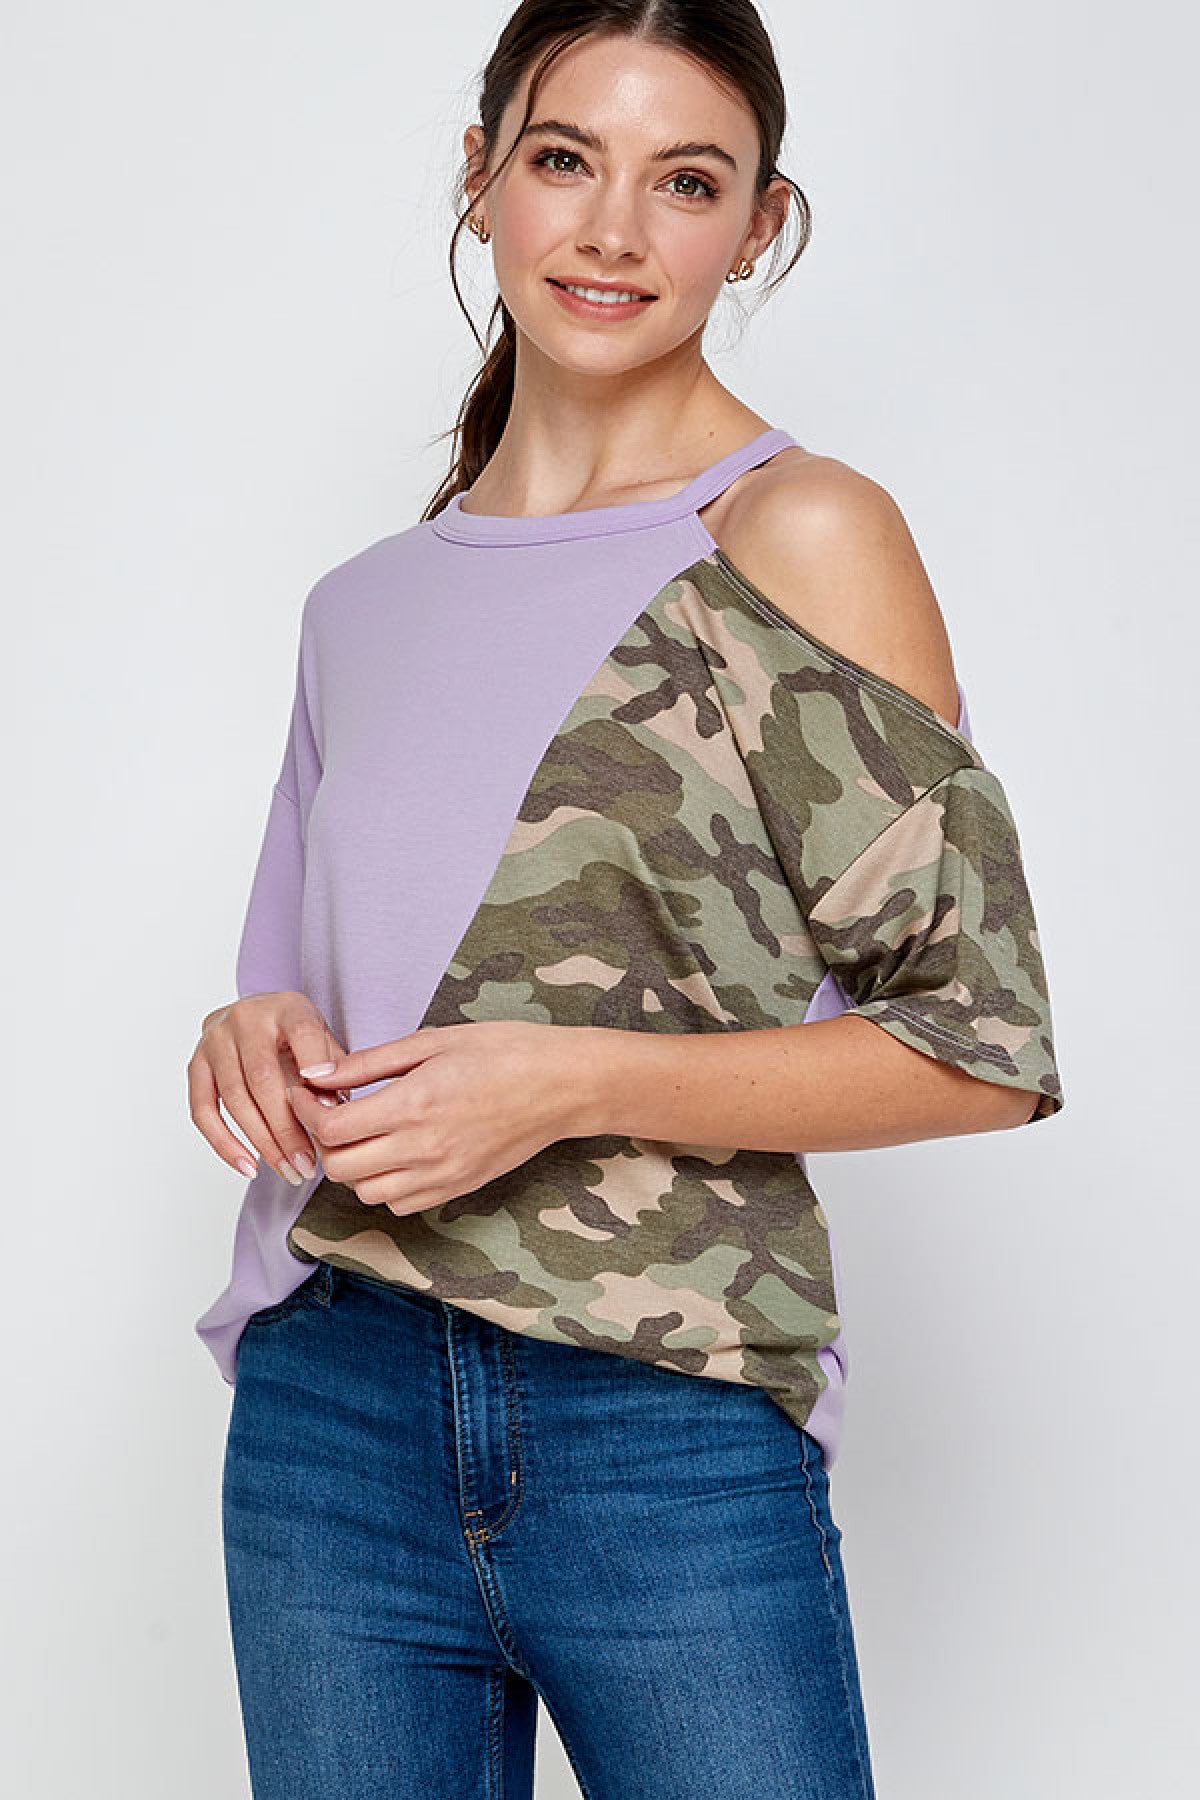 LAVENDER OLIVE CAMOUFLAGE TOP 2-2-2 (NOW $4.00 ONLY!)